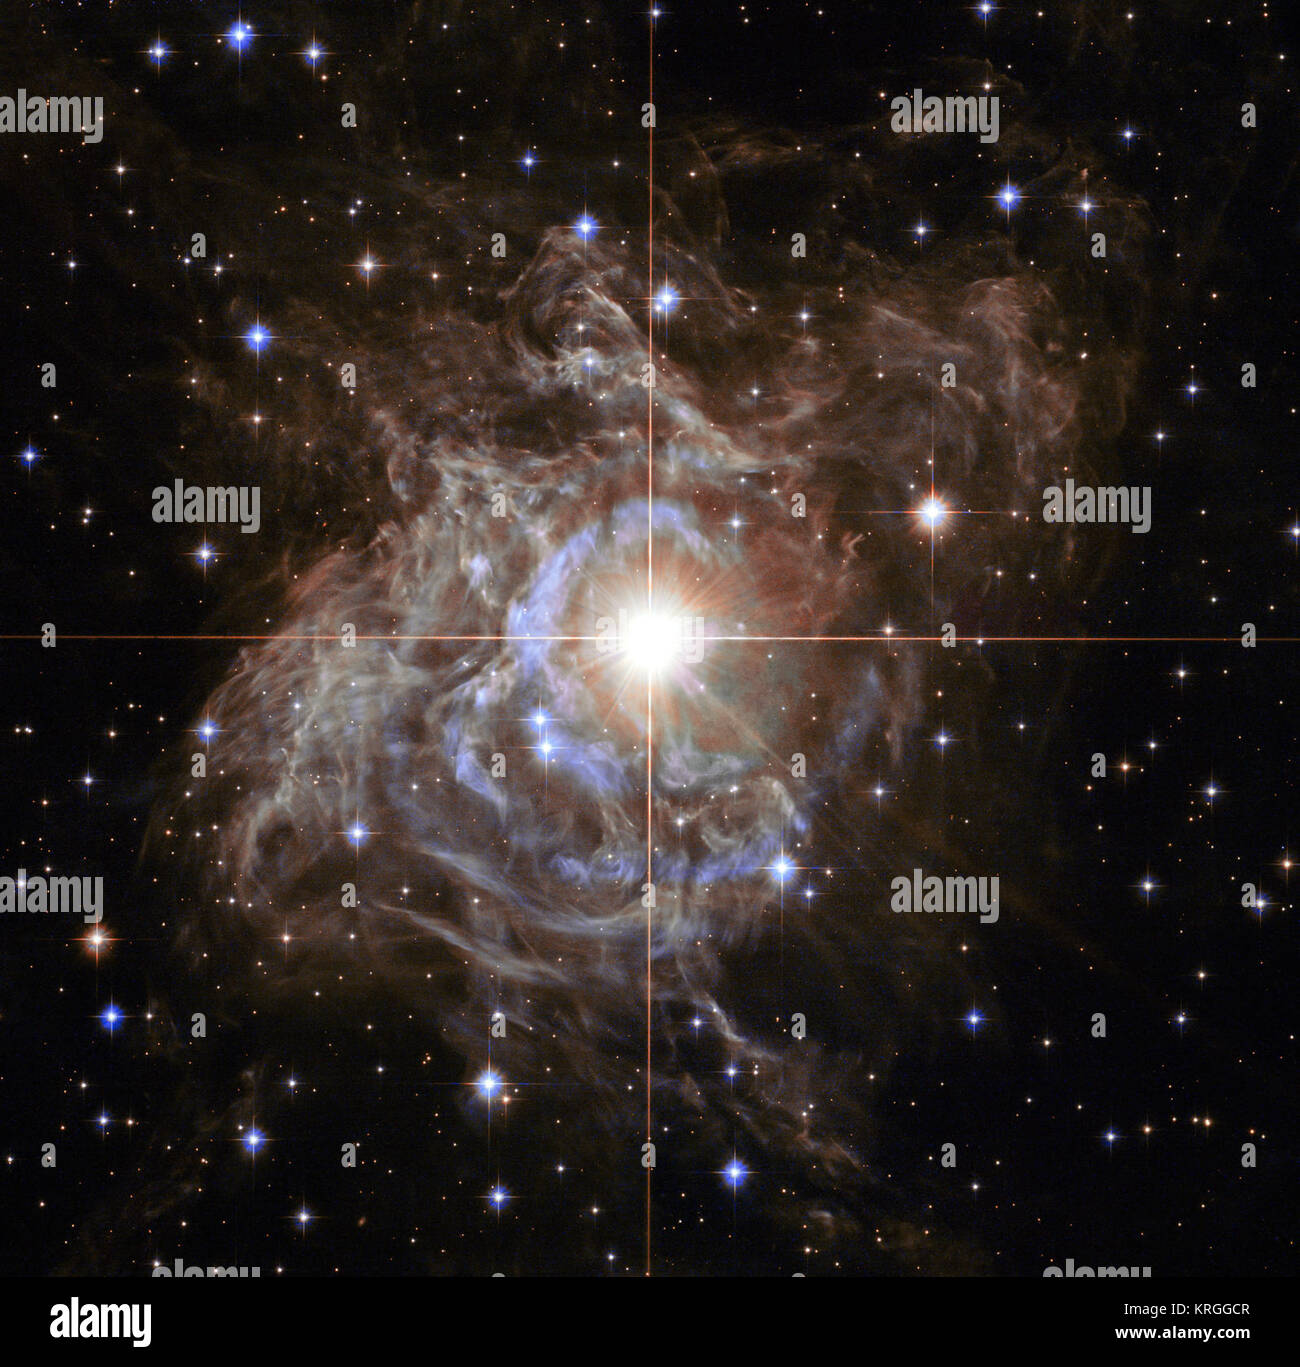 This Hubble image shows RS Puppis, a type of variable star known as a Cepheid variable. As variable stars go, Cepheids have comparatively long periods — RS Puppis, for example, varies in brightness by almost a factor of five every 40 or so days. RS Puppis is unusual; this variable star is shrouded by thick, dark clouds of dust enabling a phenomenon known as a light echo to be shown with stunning clarity. These Hubble observations show the ethereal object embedded in its dusty environment, set against a dark sky filled with background galaxies. Heic1323a -1243686232 Stock Photo